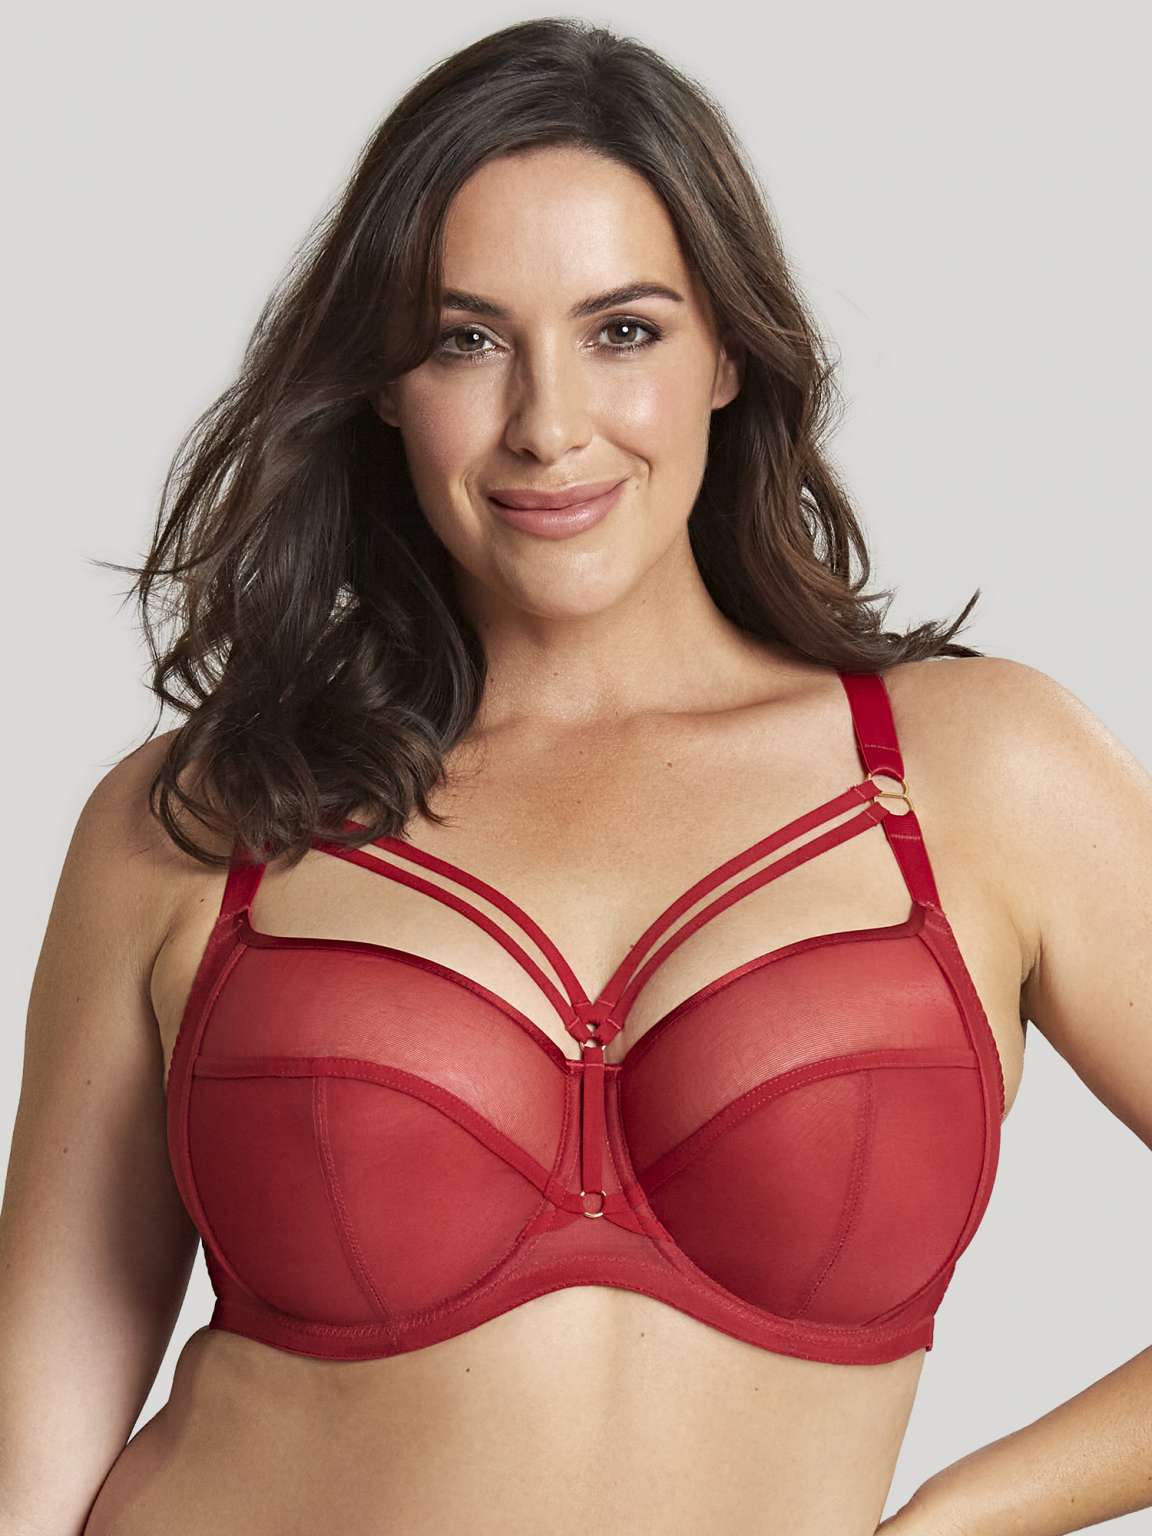 D Cup Bra: Bras for D Cup Boobs and Breast Size Tagged Panache